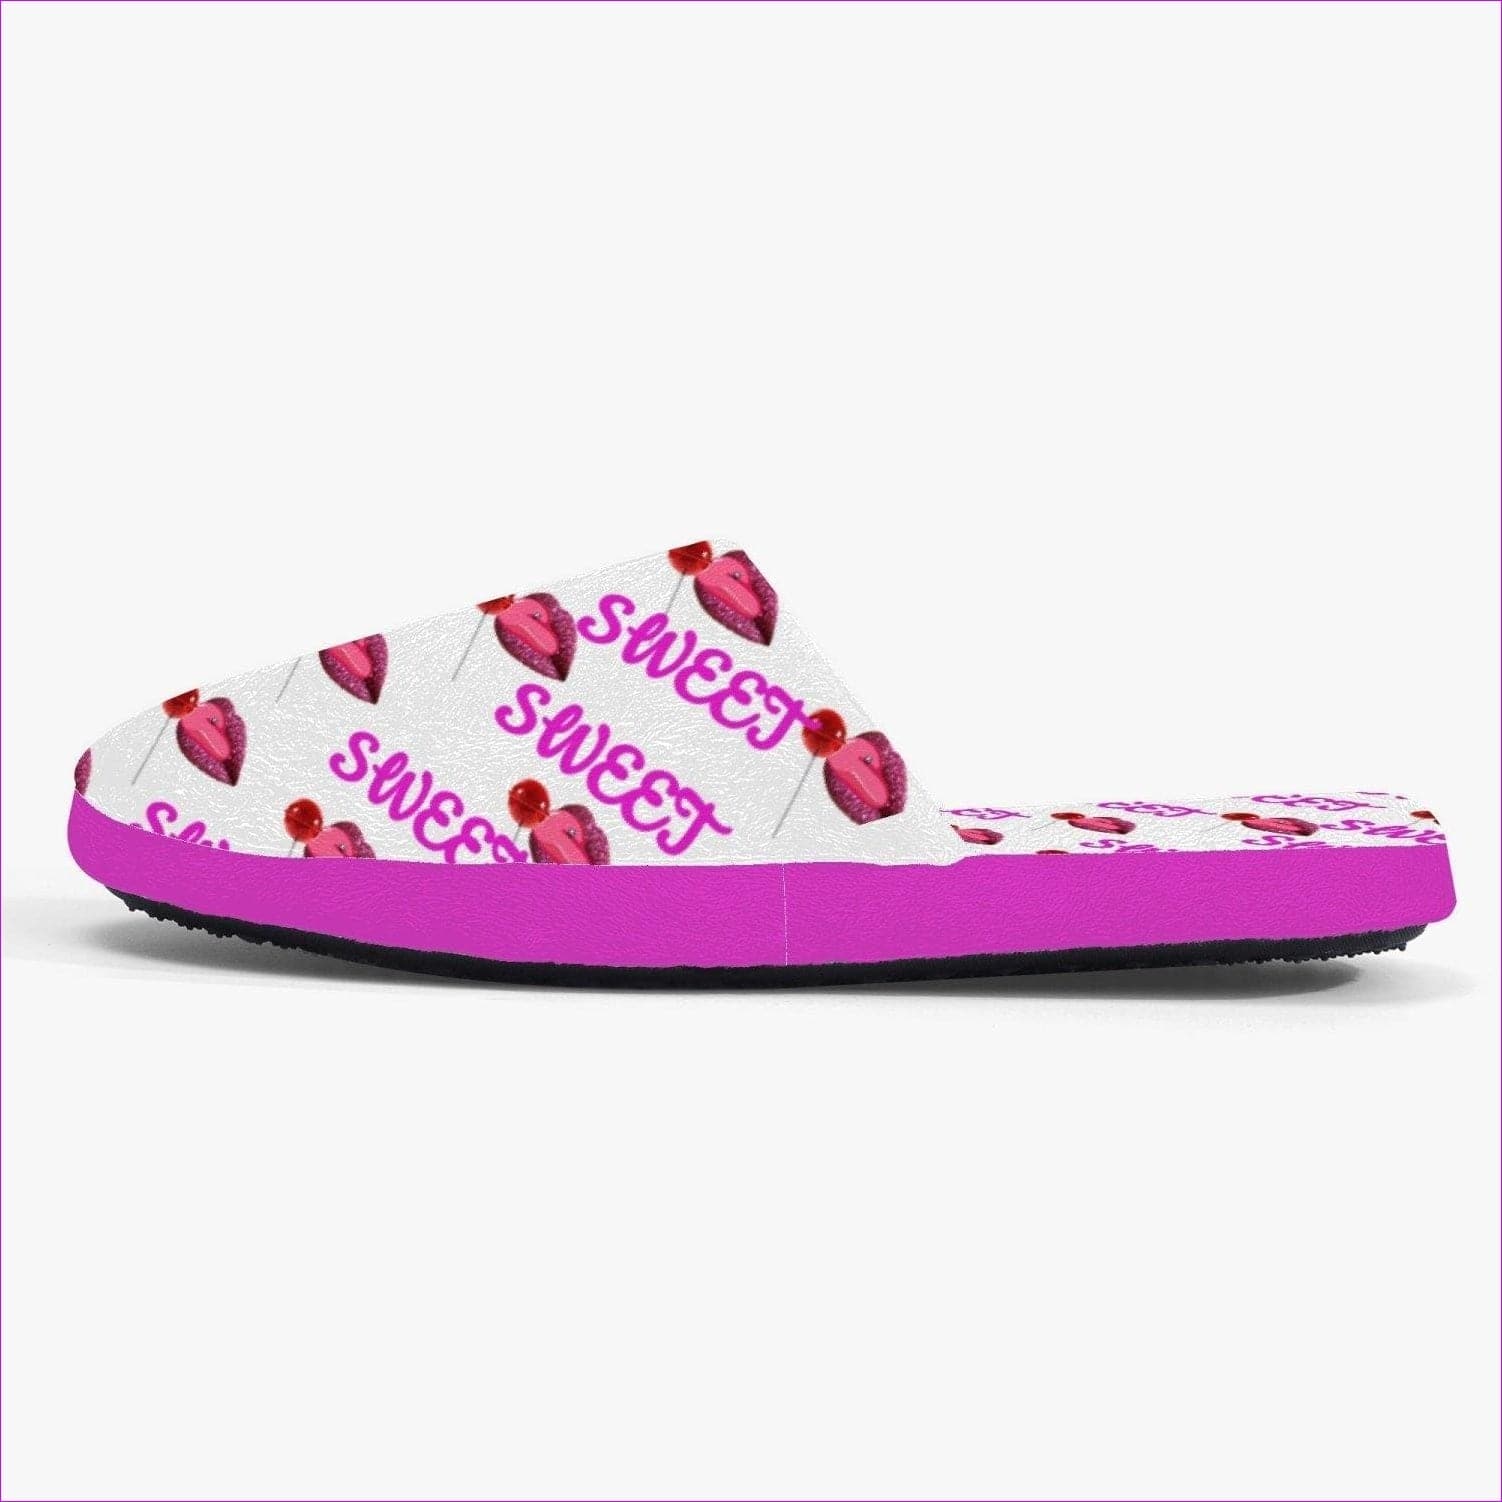 - Sweet Clothing Classic Cotton Slippers - womens slippers at TFC&H Co.